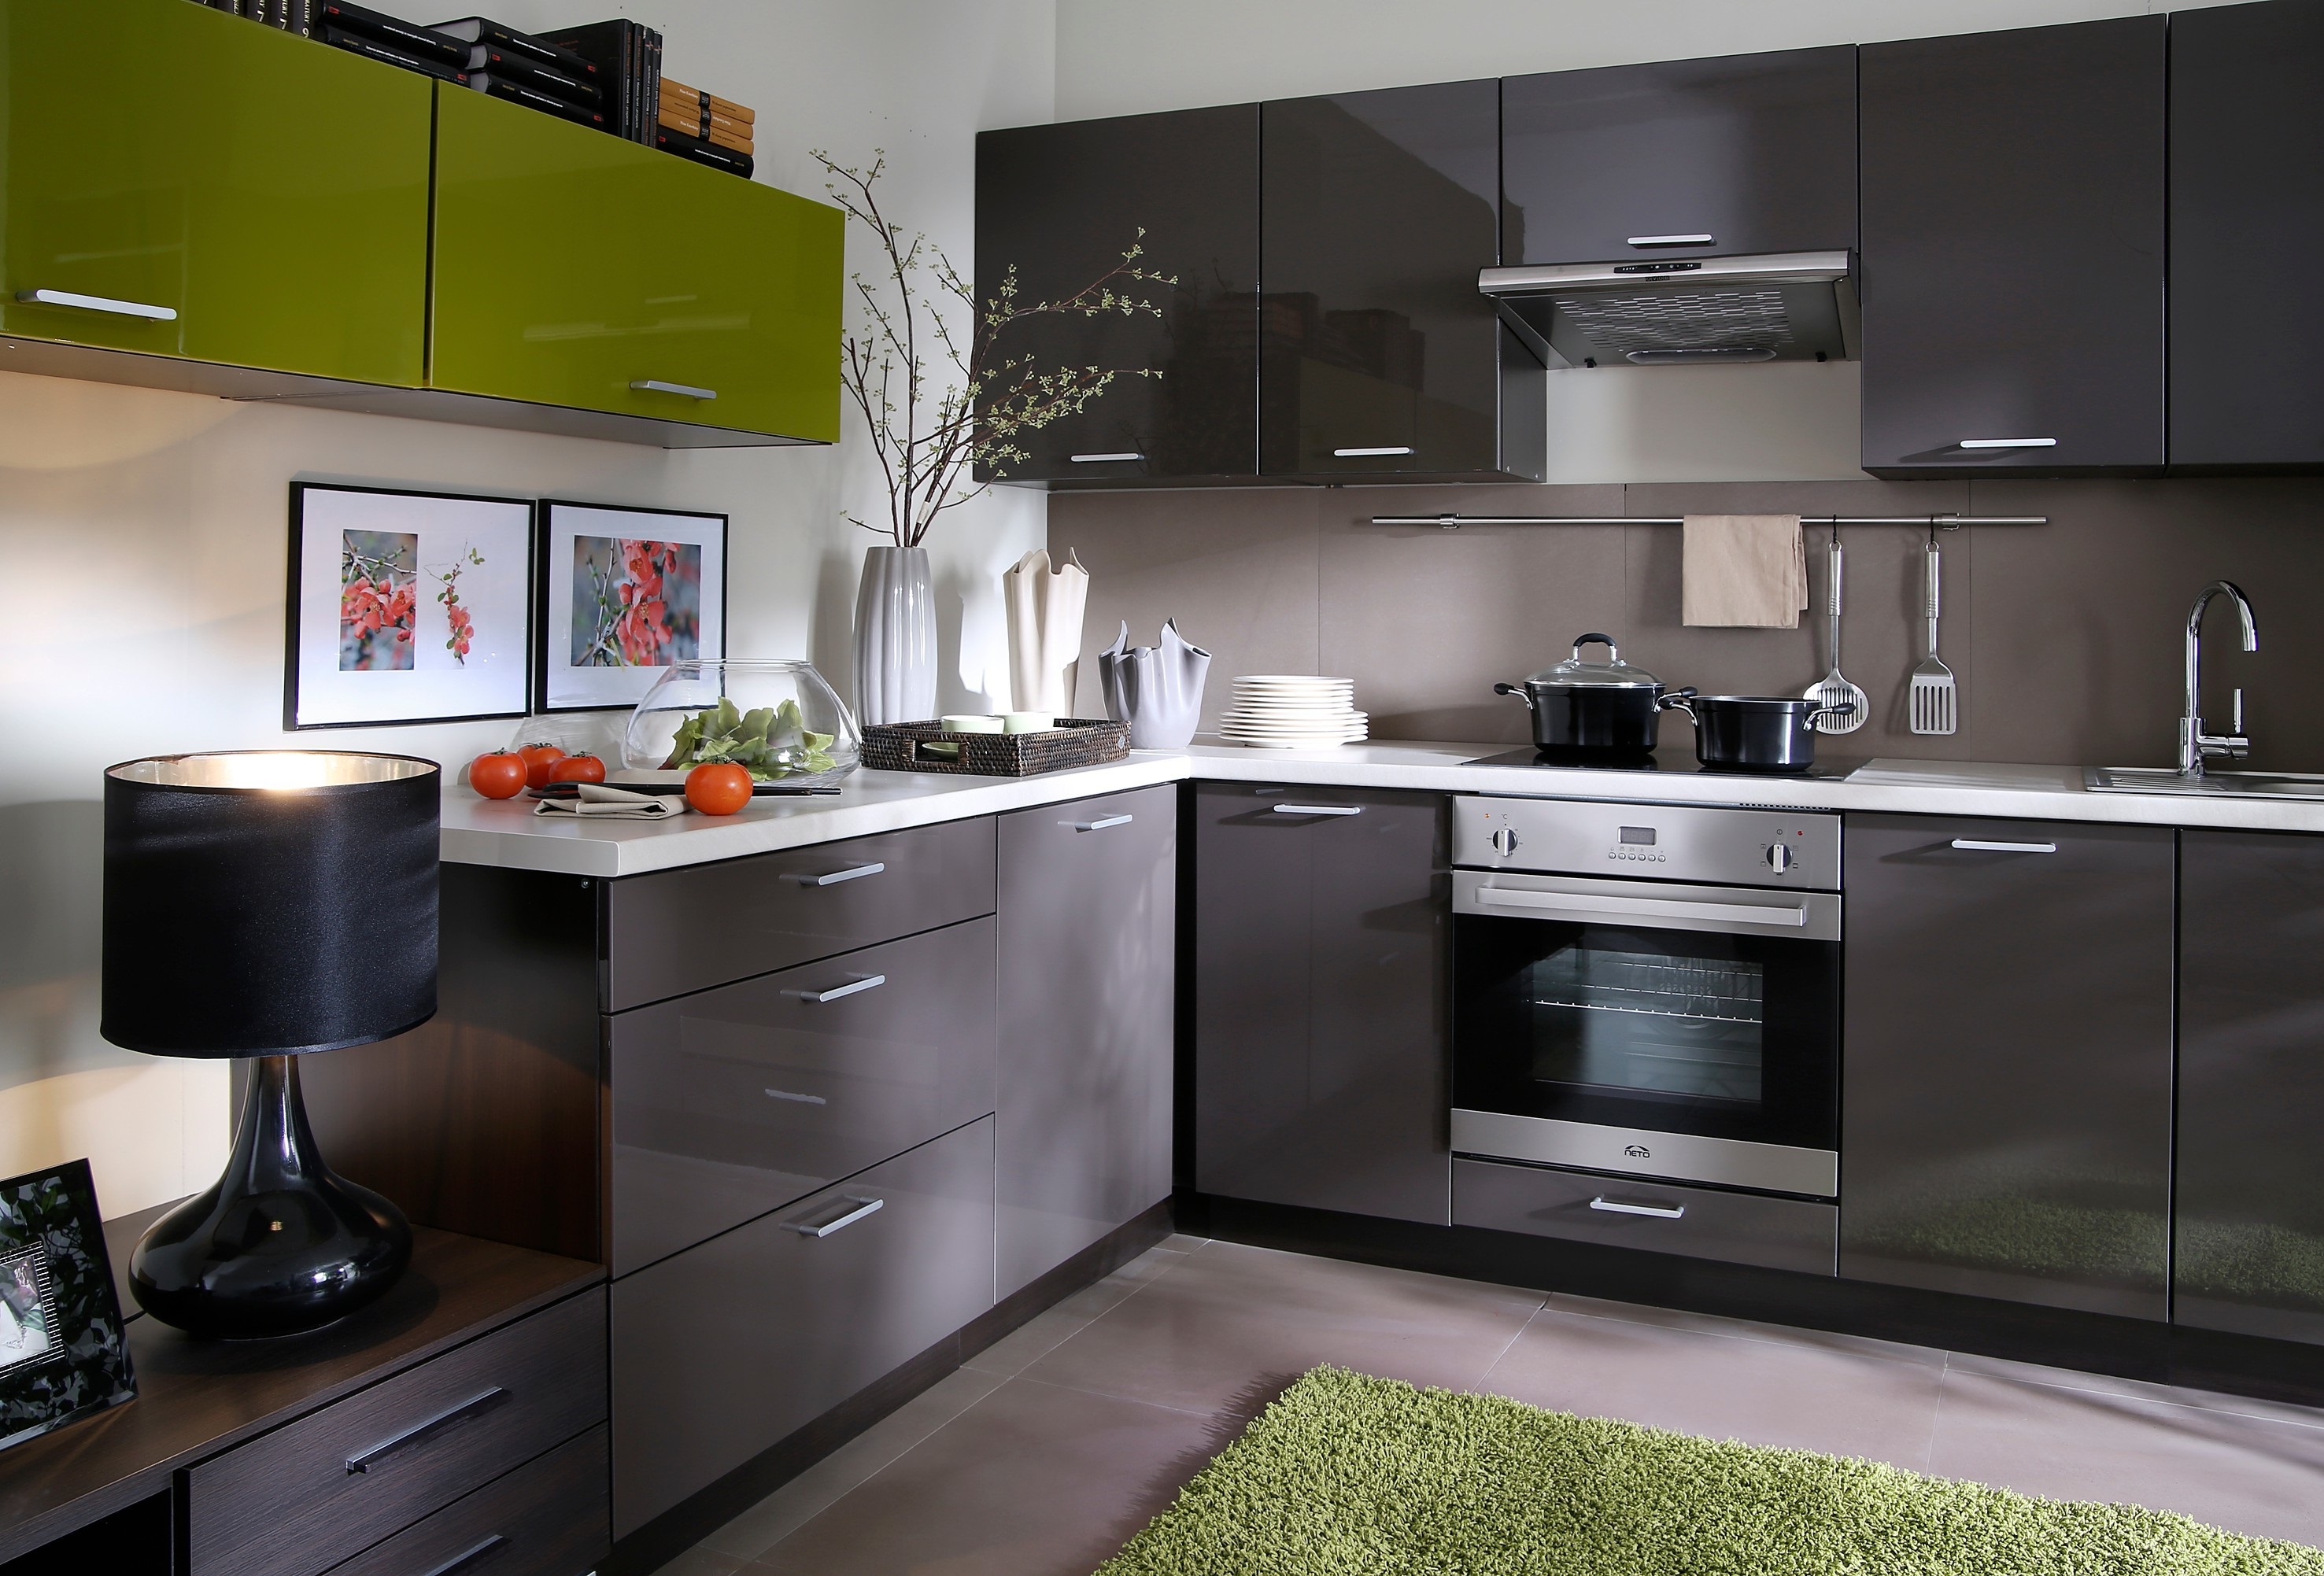 An example of a beautiful corner kitchen design